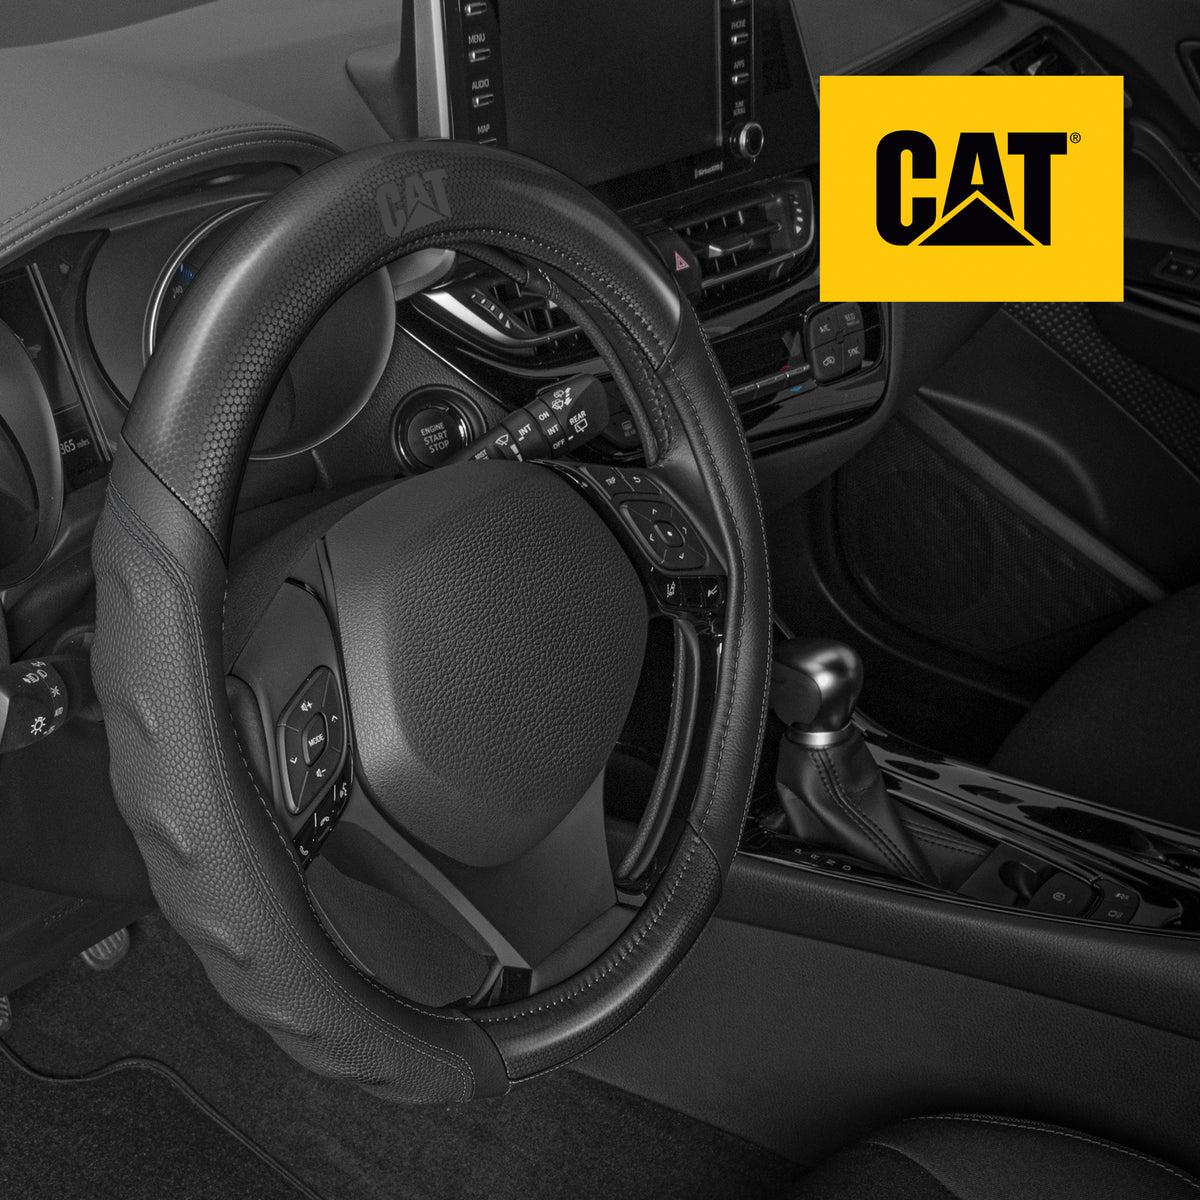 Cat Steering Wheel Cover  Harlow's Store and Garden Gifts